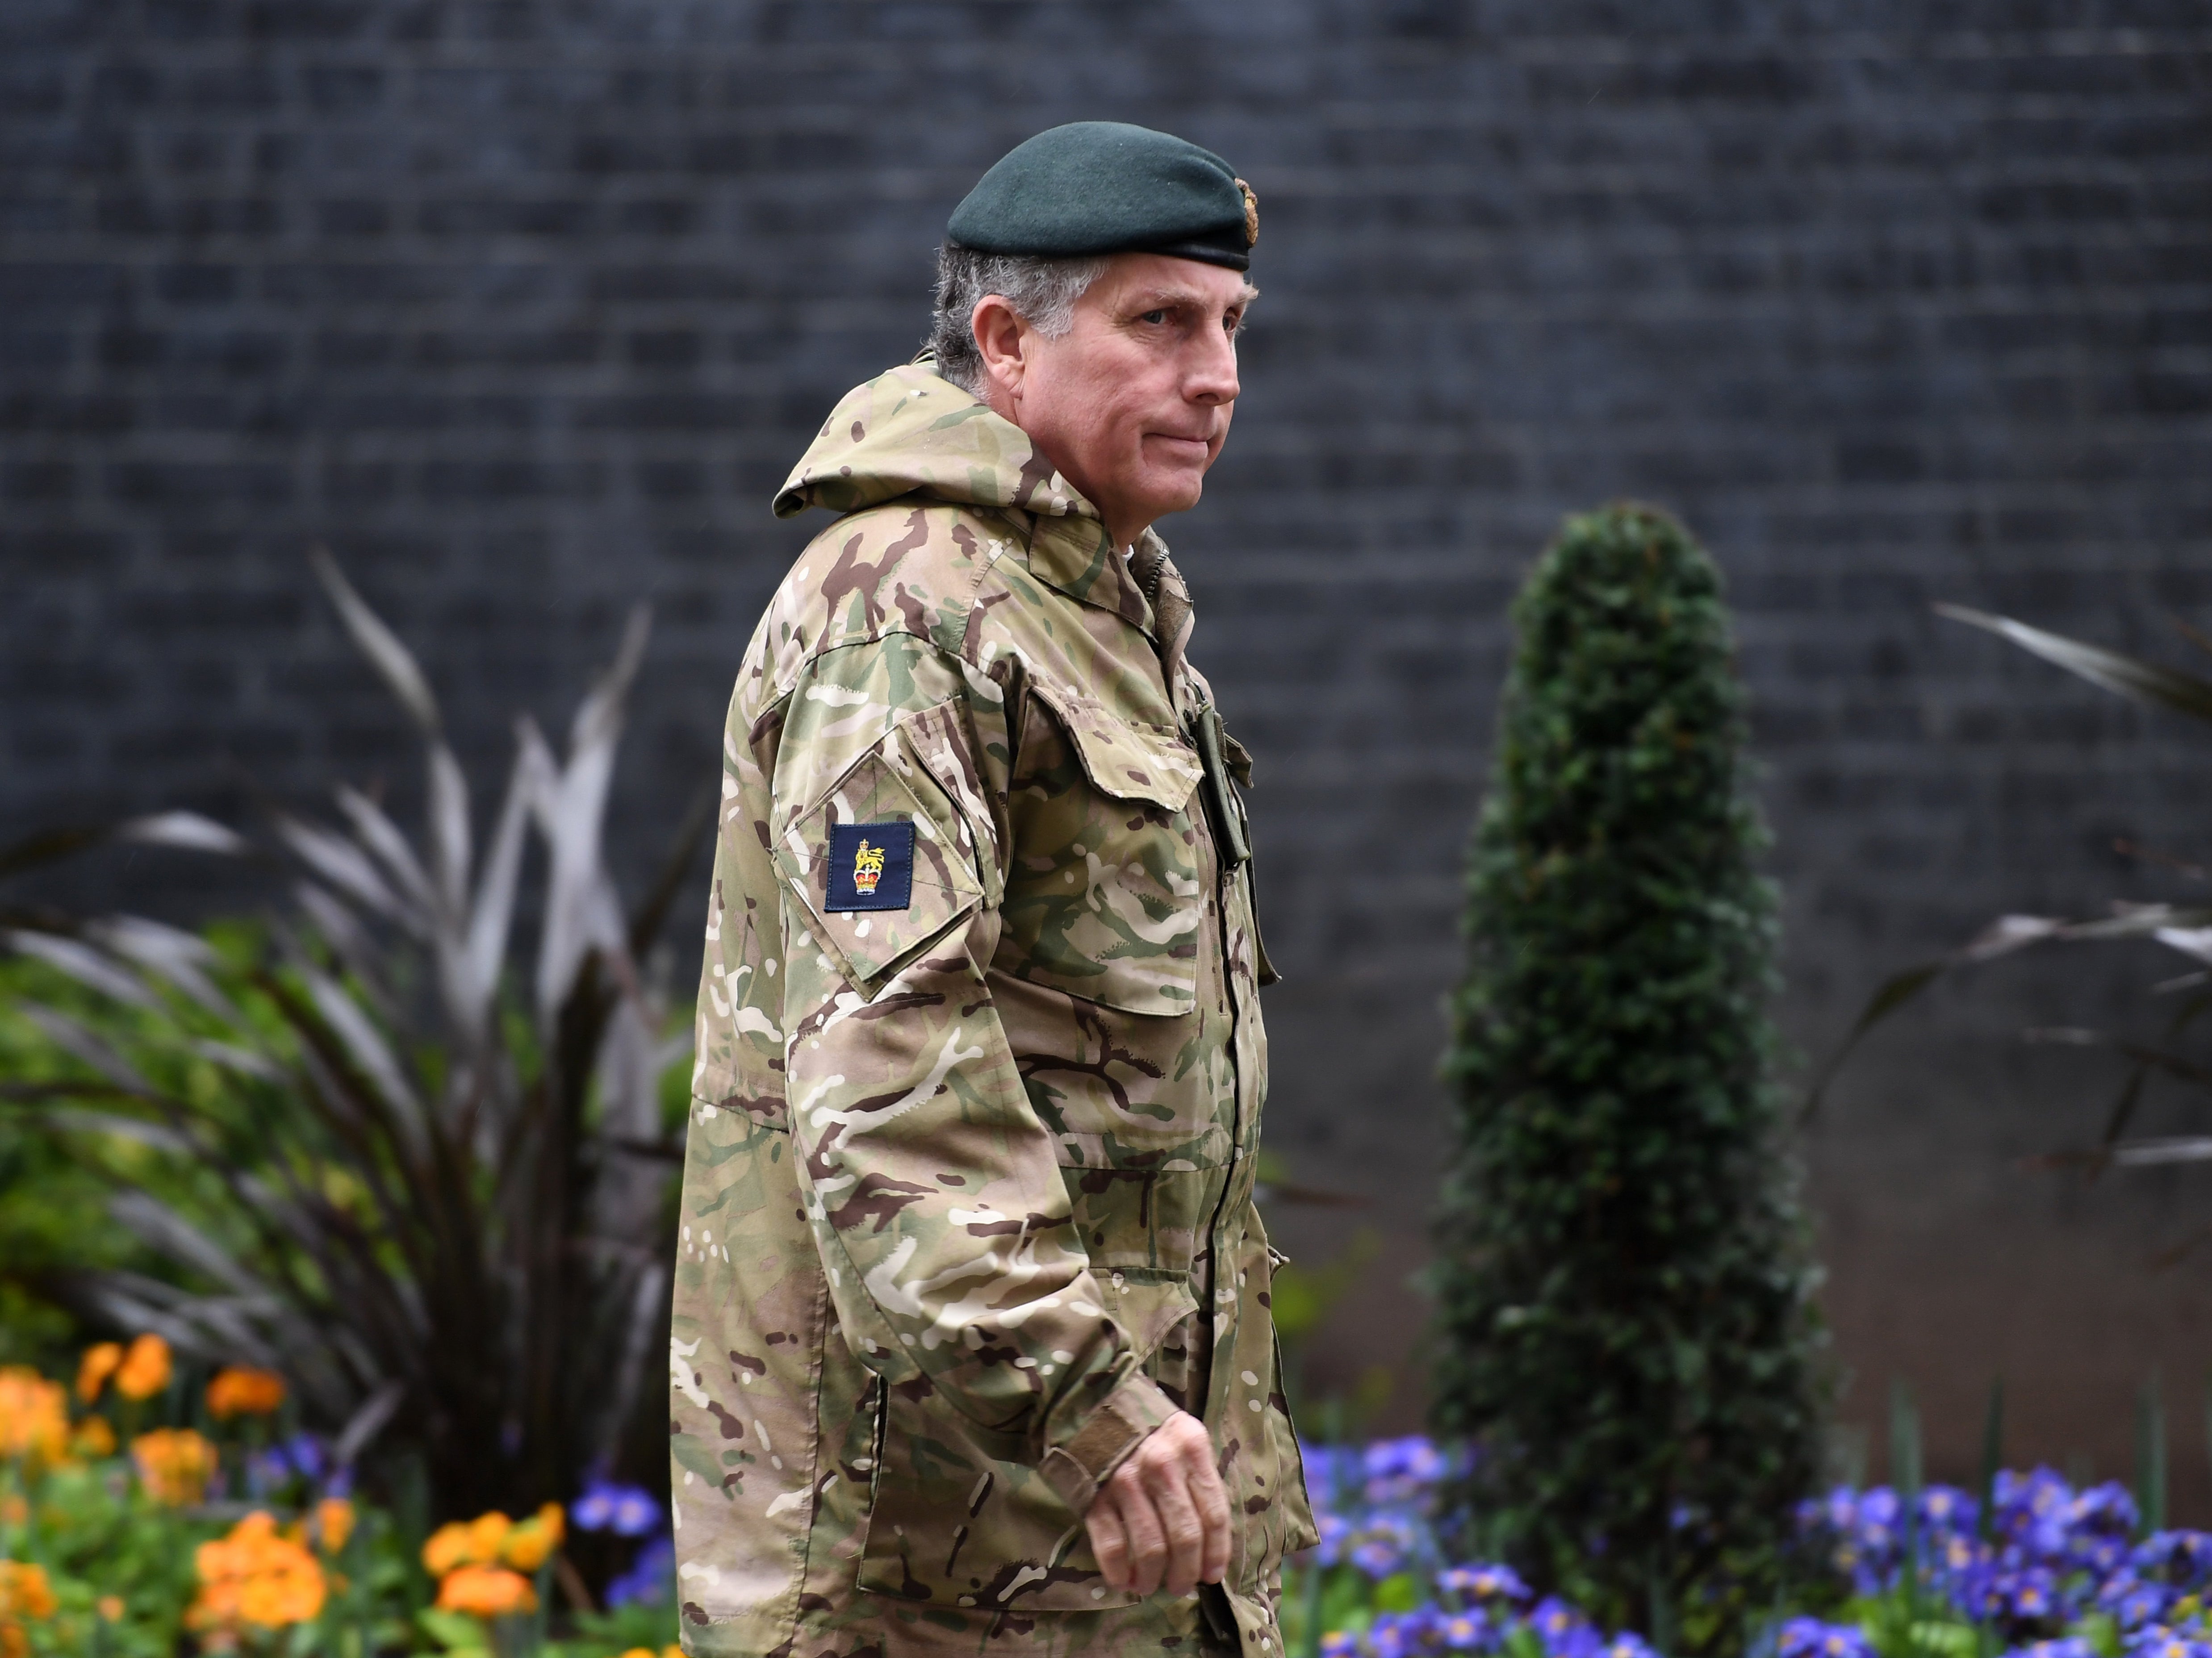 Chief of the Defence Staff, General Sir Nick Carter, visits Downing Street on 5 March